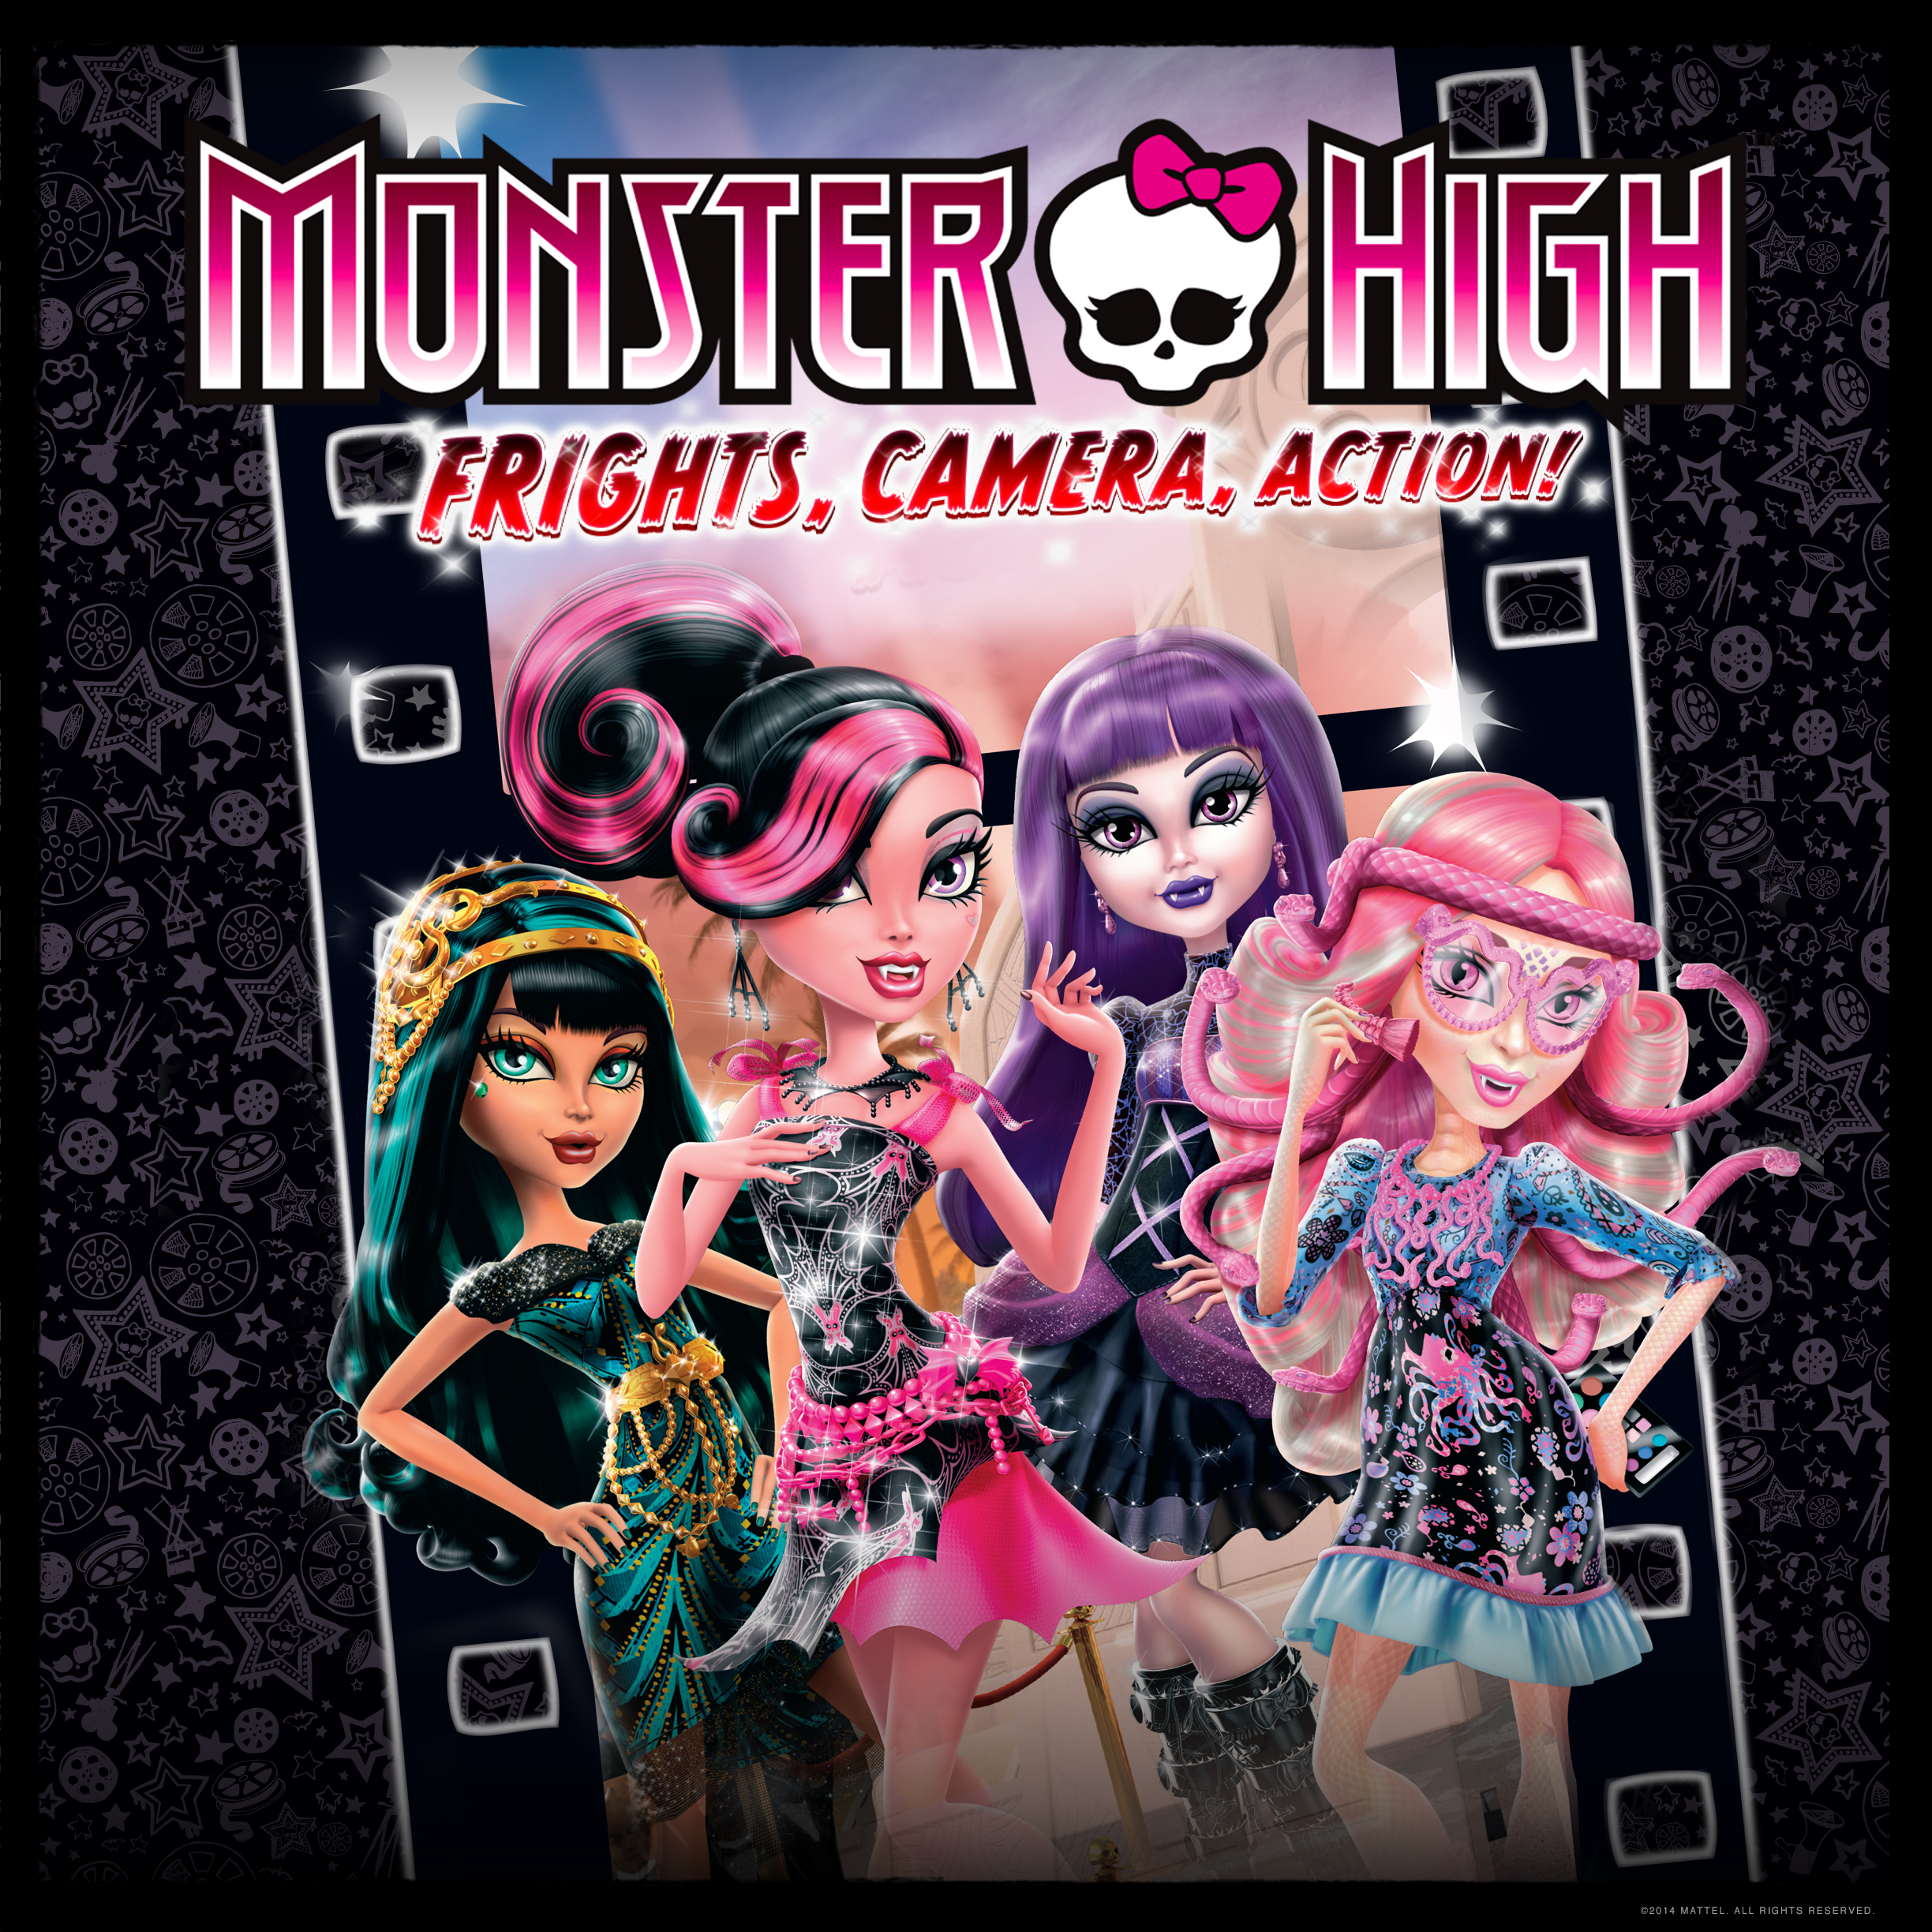 Monster High: Frights, Camera, Action! #9